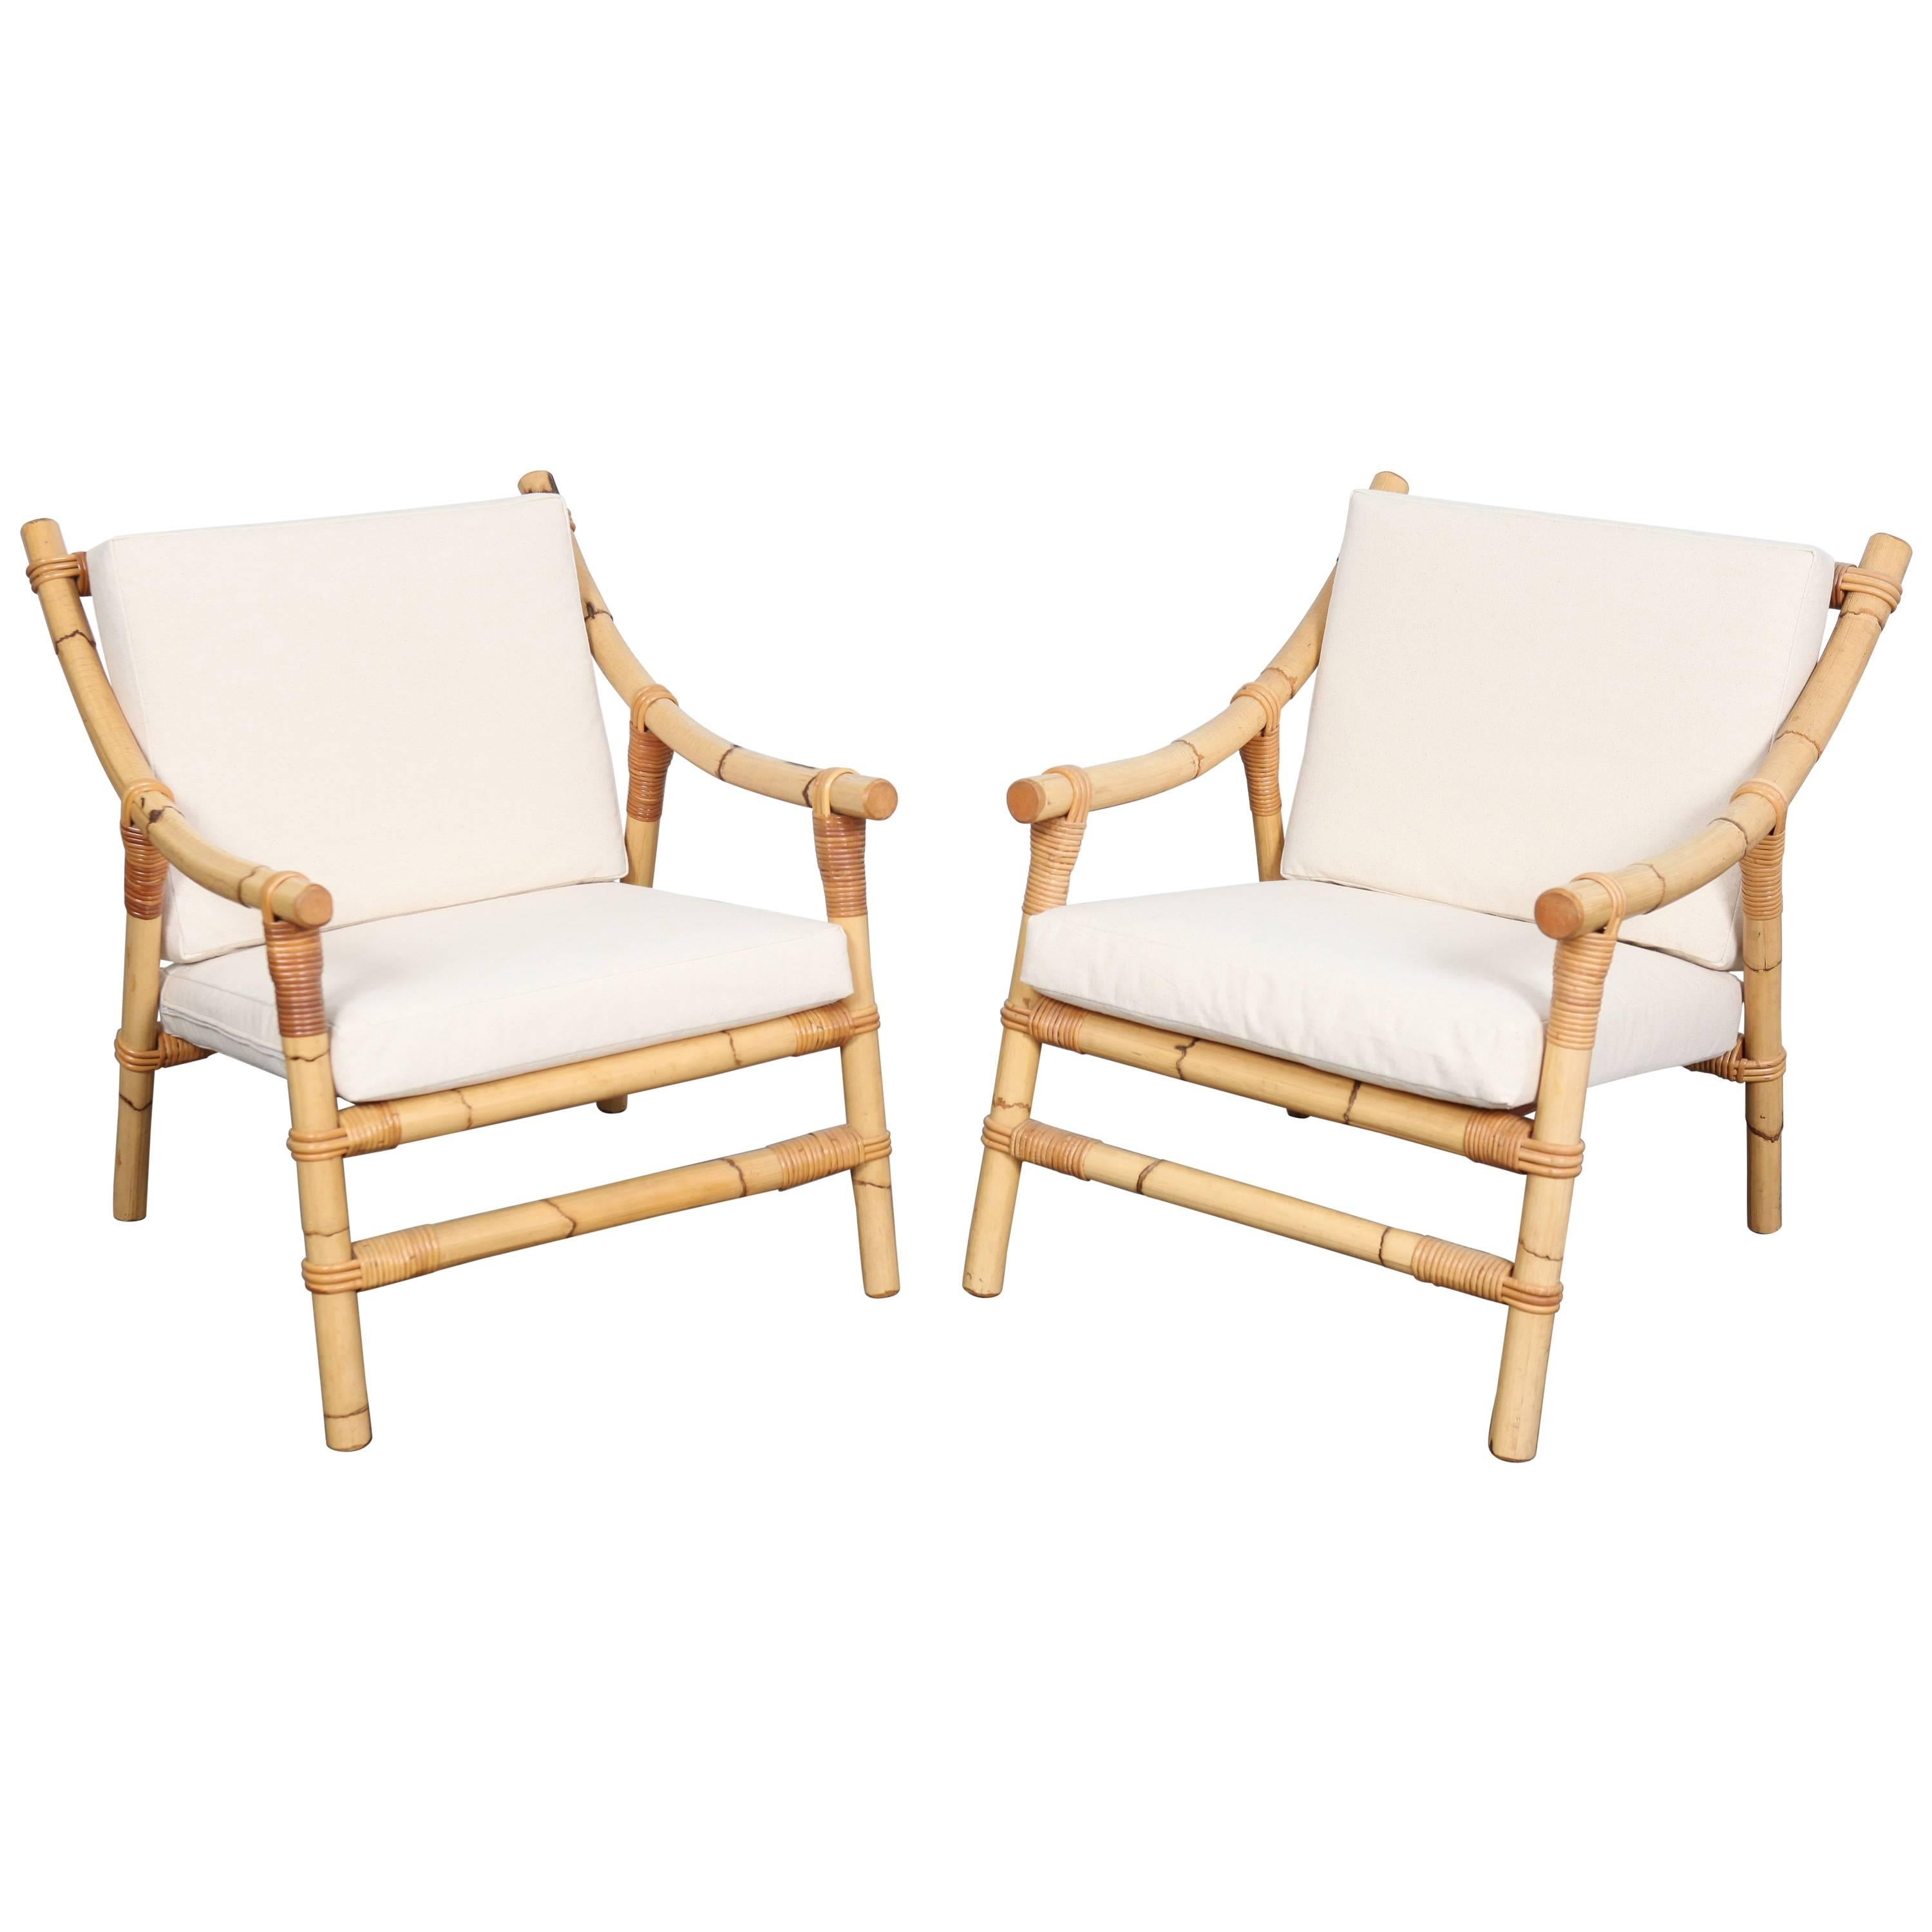 Pair of Bamboo Mid-Century Modern Lounge Chairs